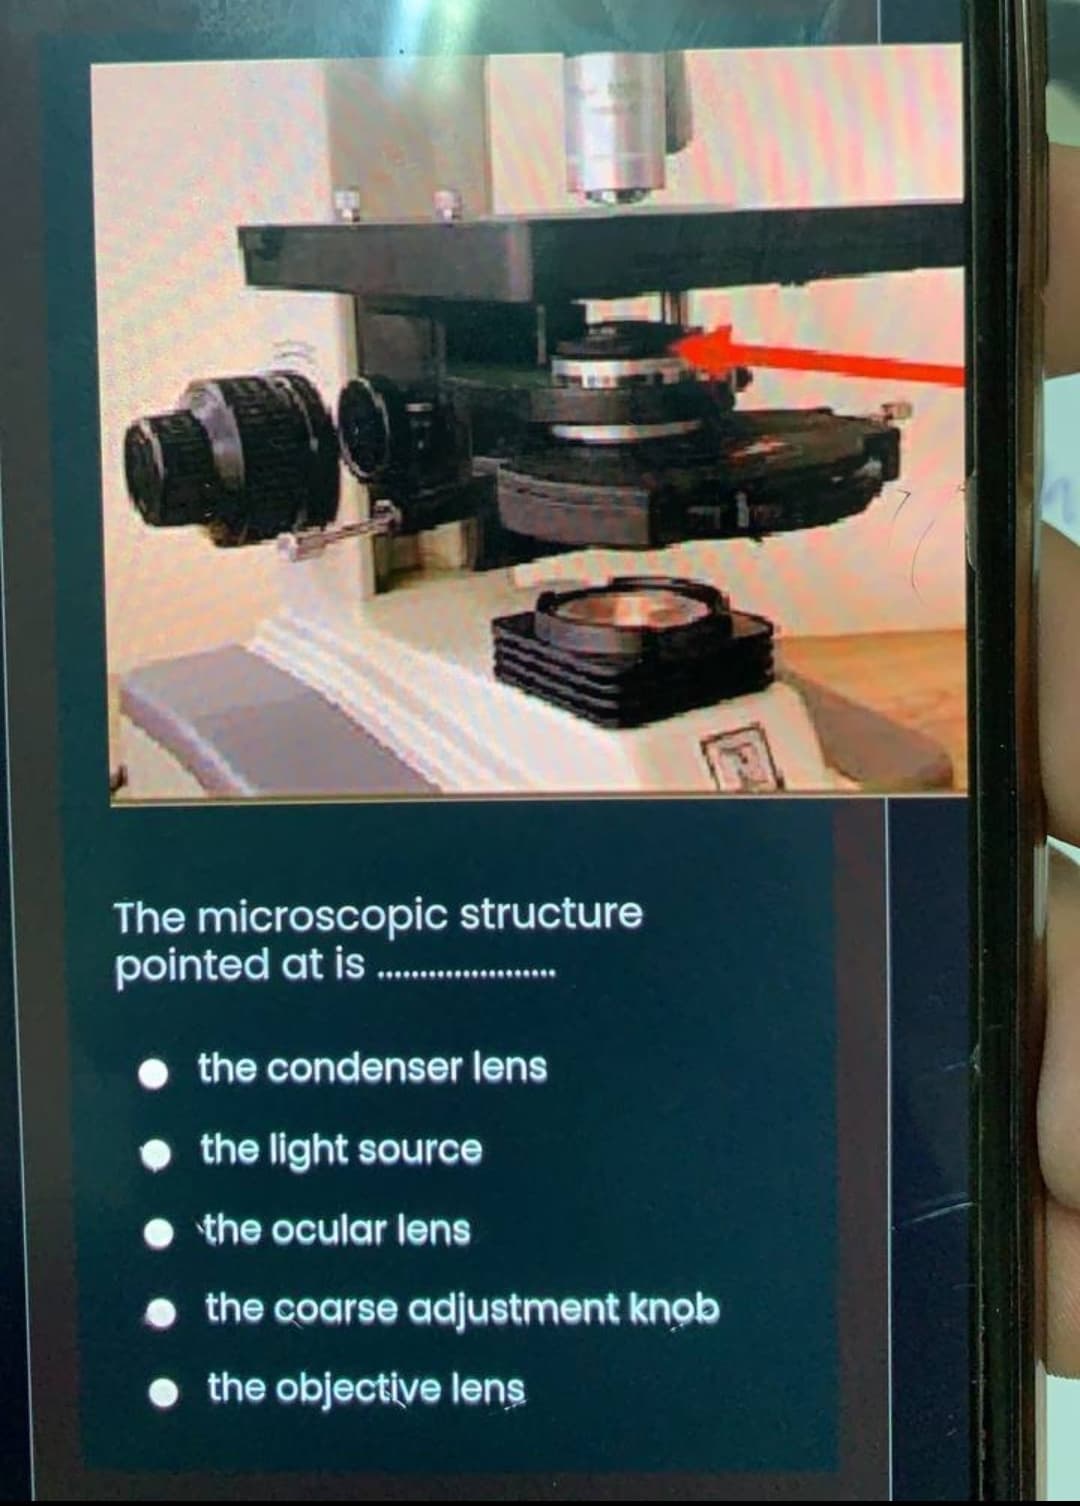 The microscopic structure
pointed at is .
the condenser lens
• the light source
• the ocular lens
• the coarse adjustment knob
• the objective lens
